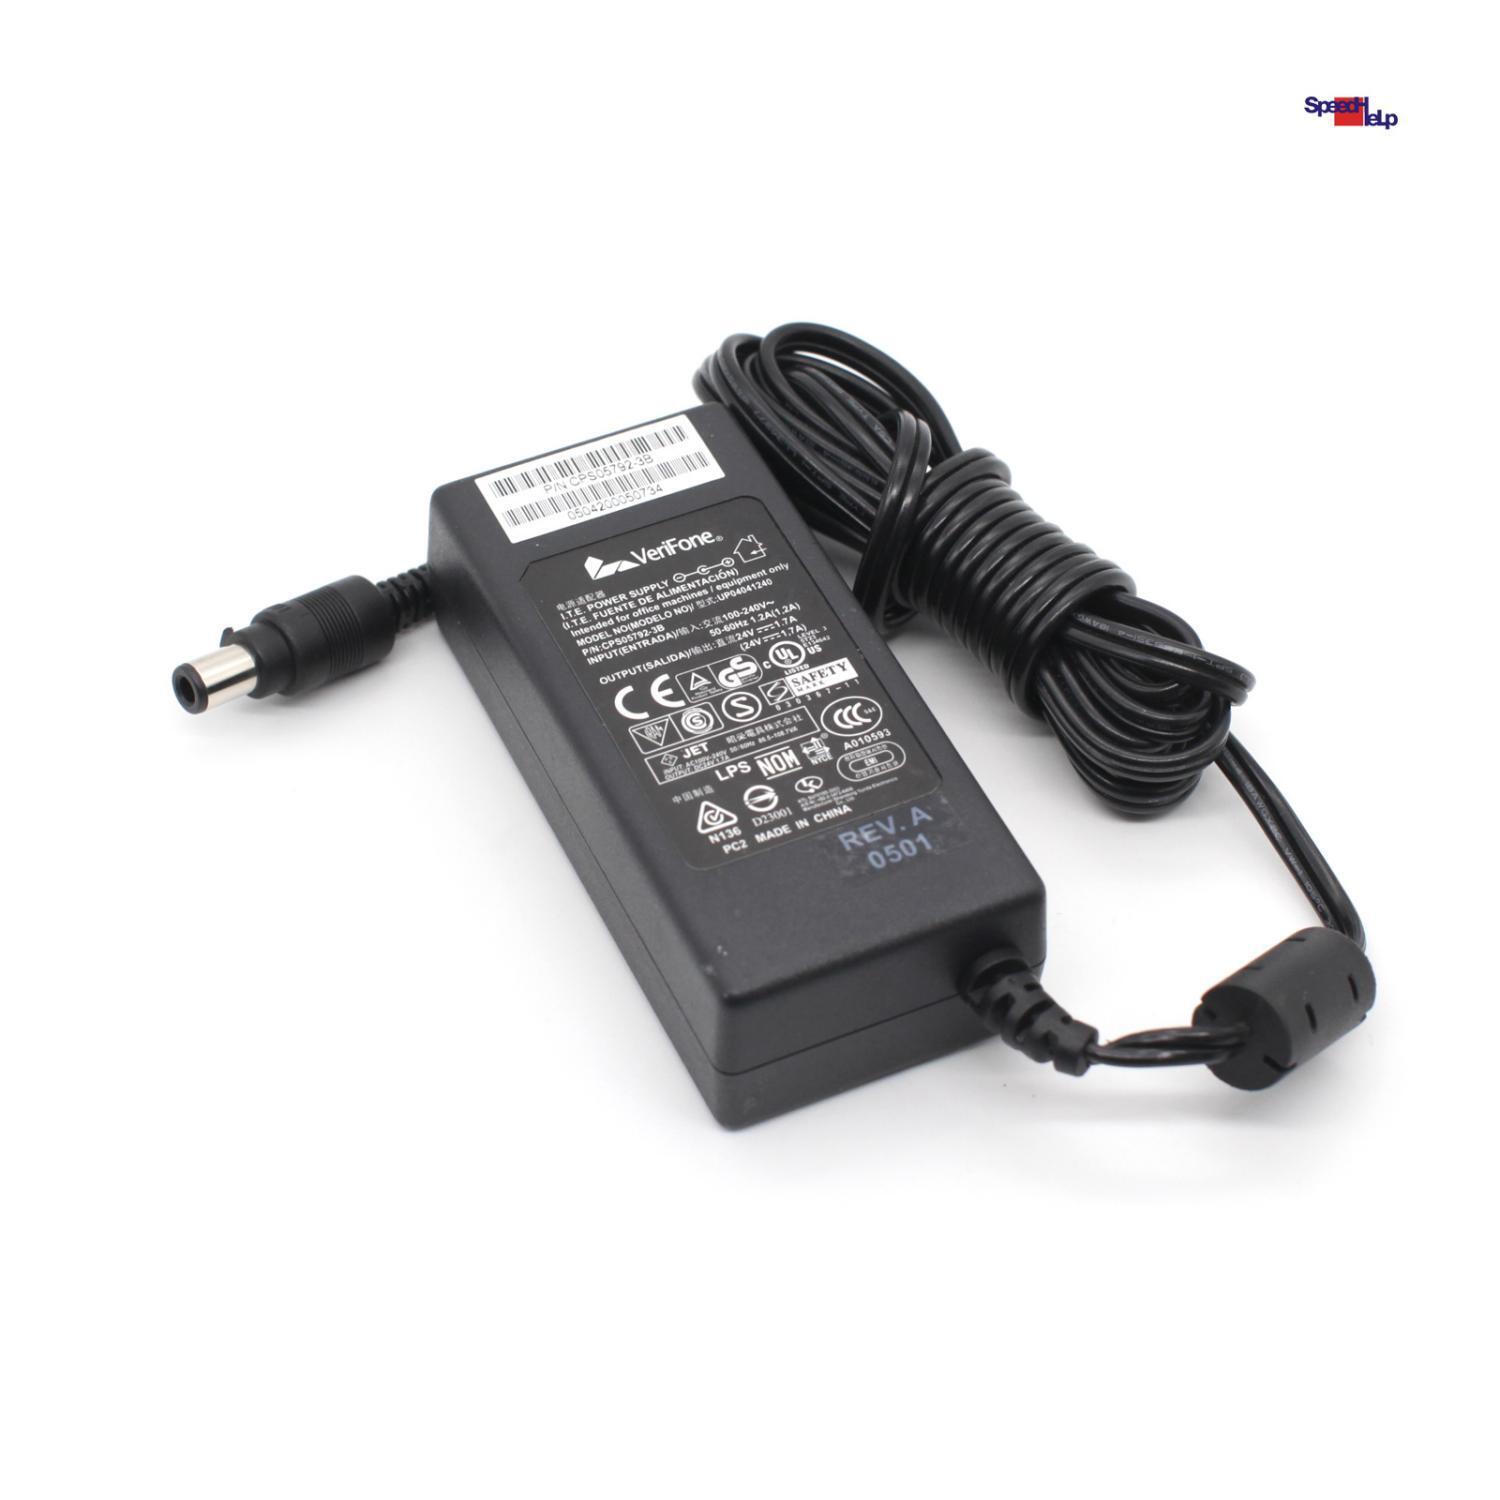 Verifone Power Supply Adapter UP04041240 Unit PSU 24V 1.7A CPS05792-3B